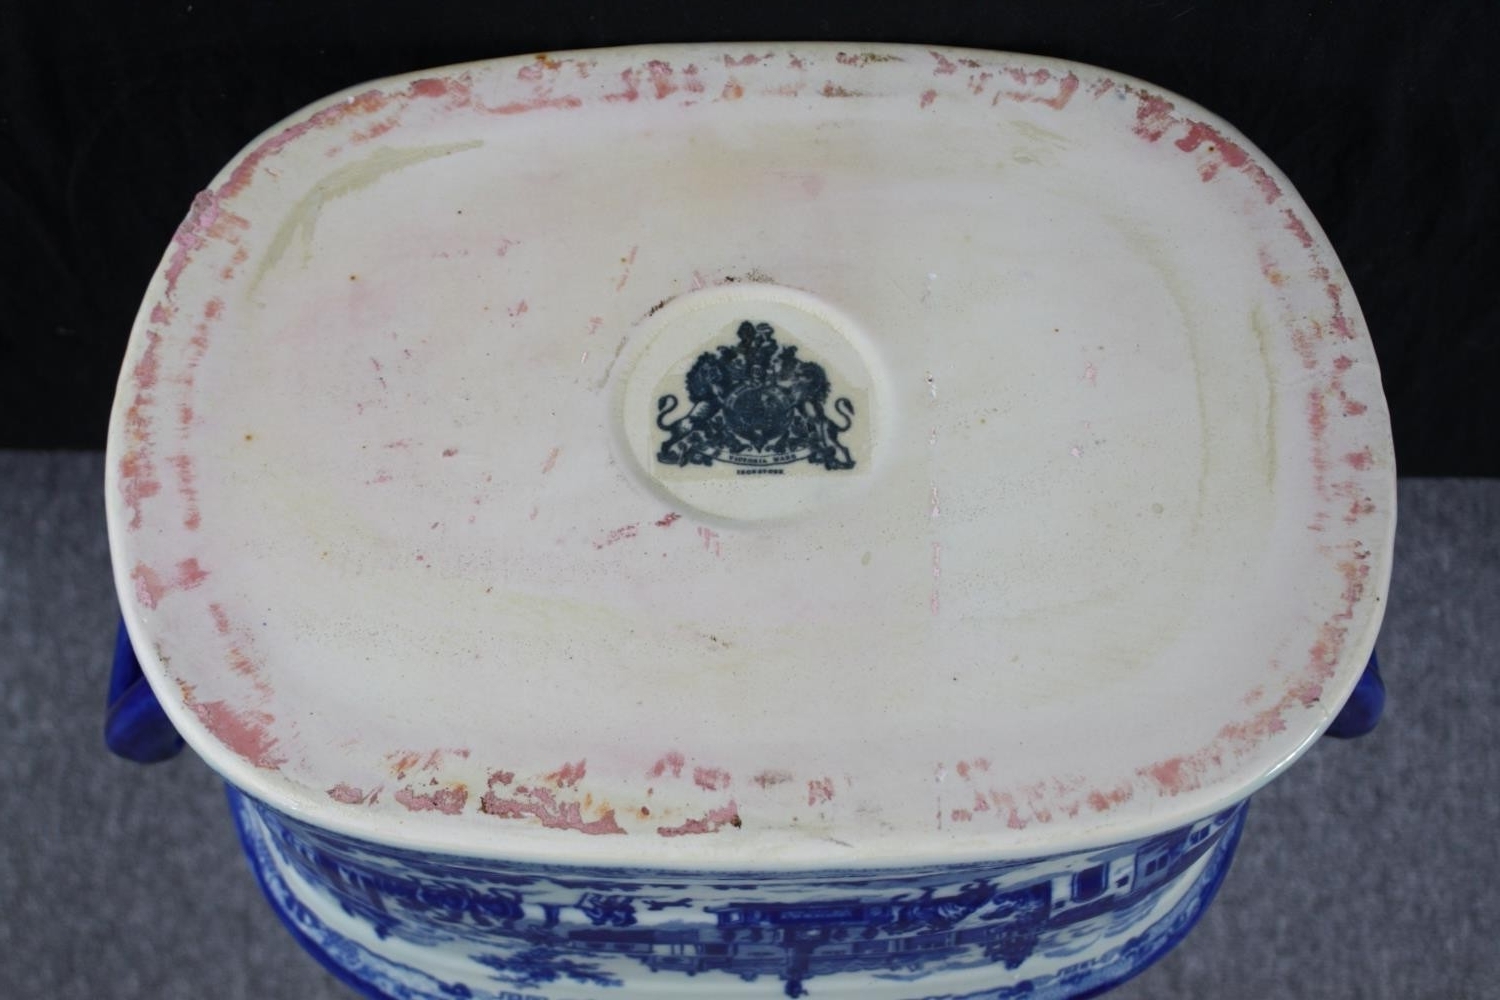 Ironstone planter. Decorated with blue and white transferware. H.22cm. - Image 4 of 4